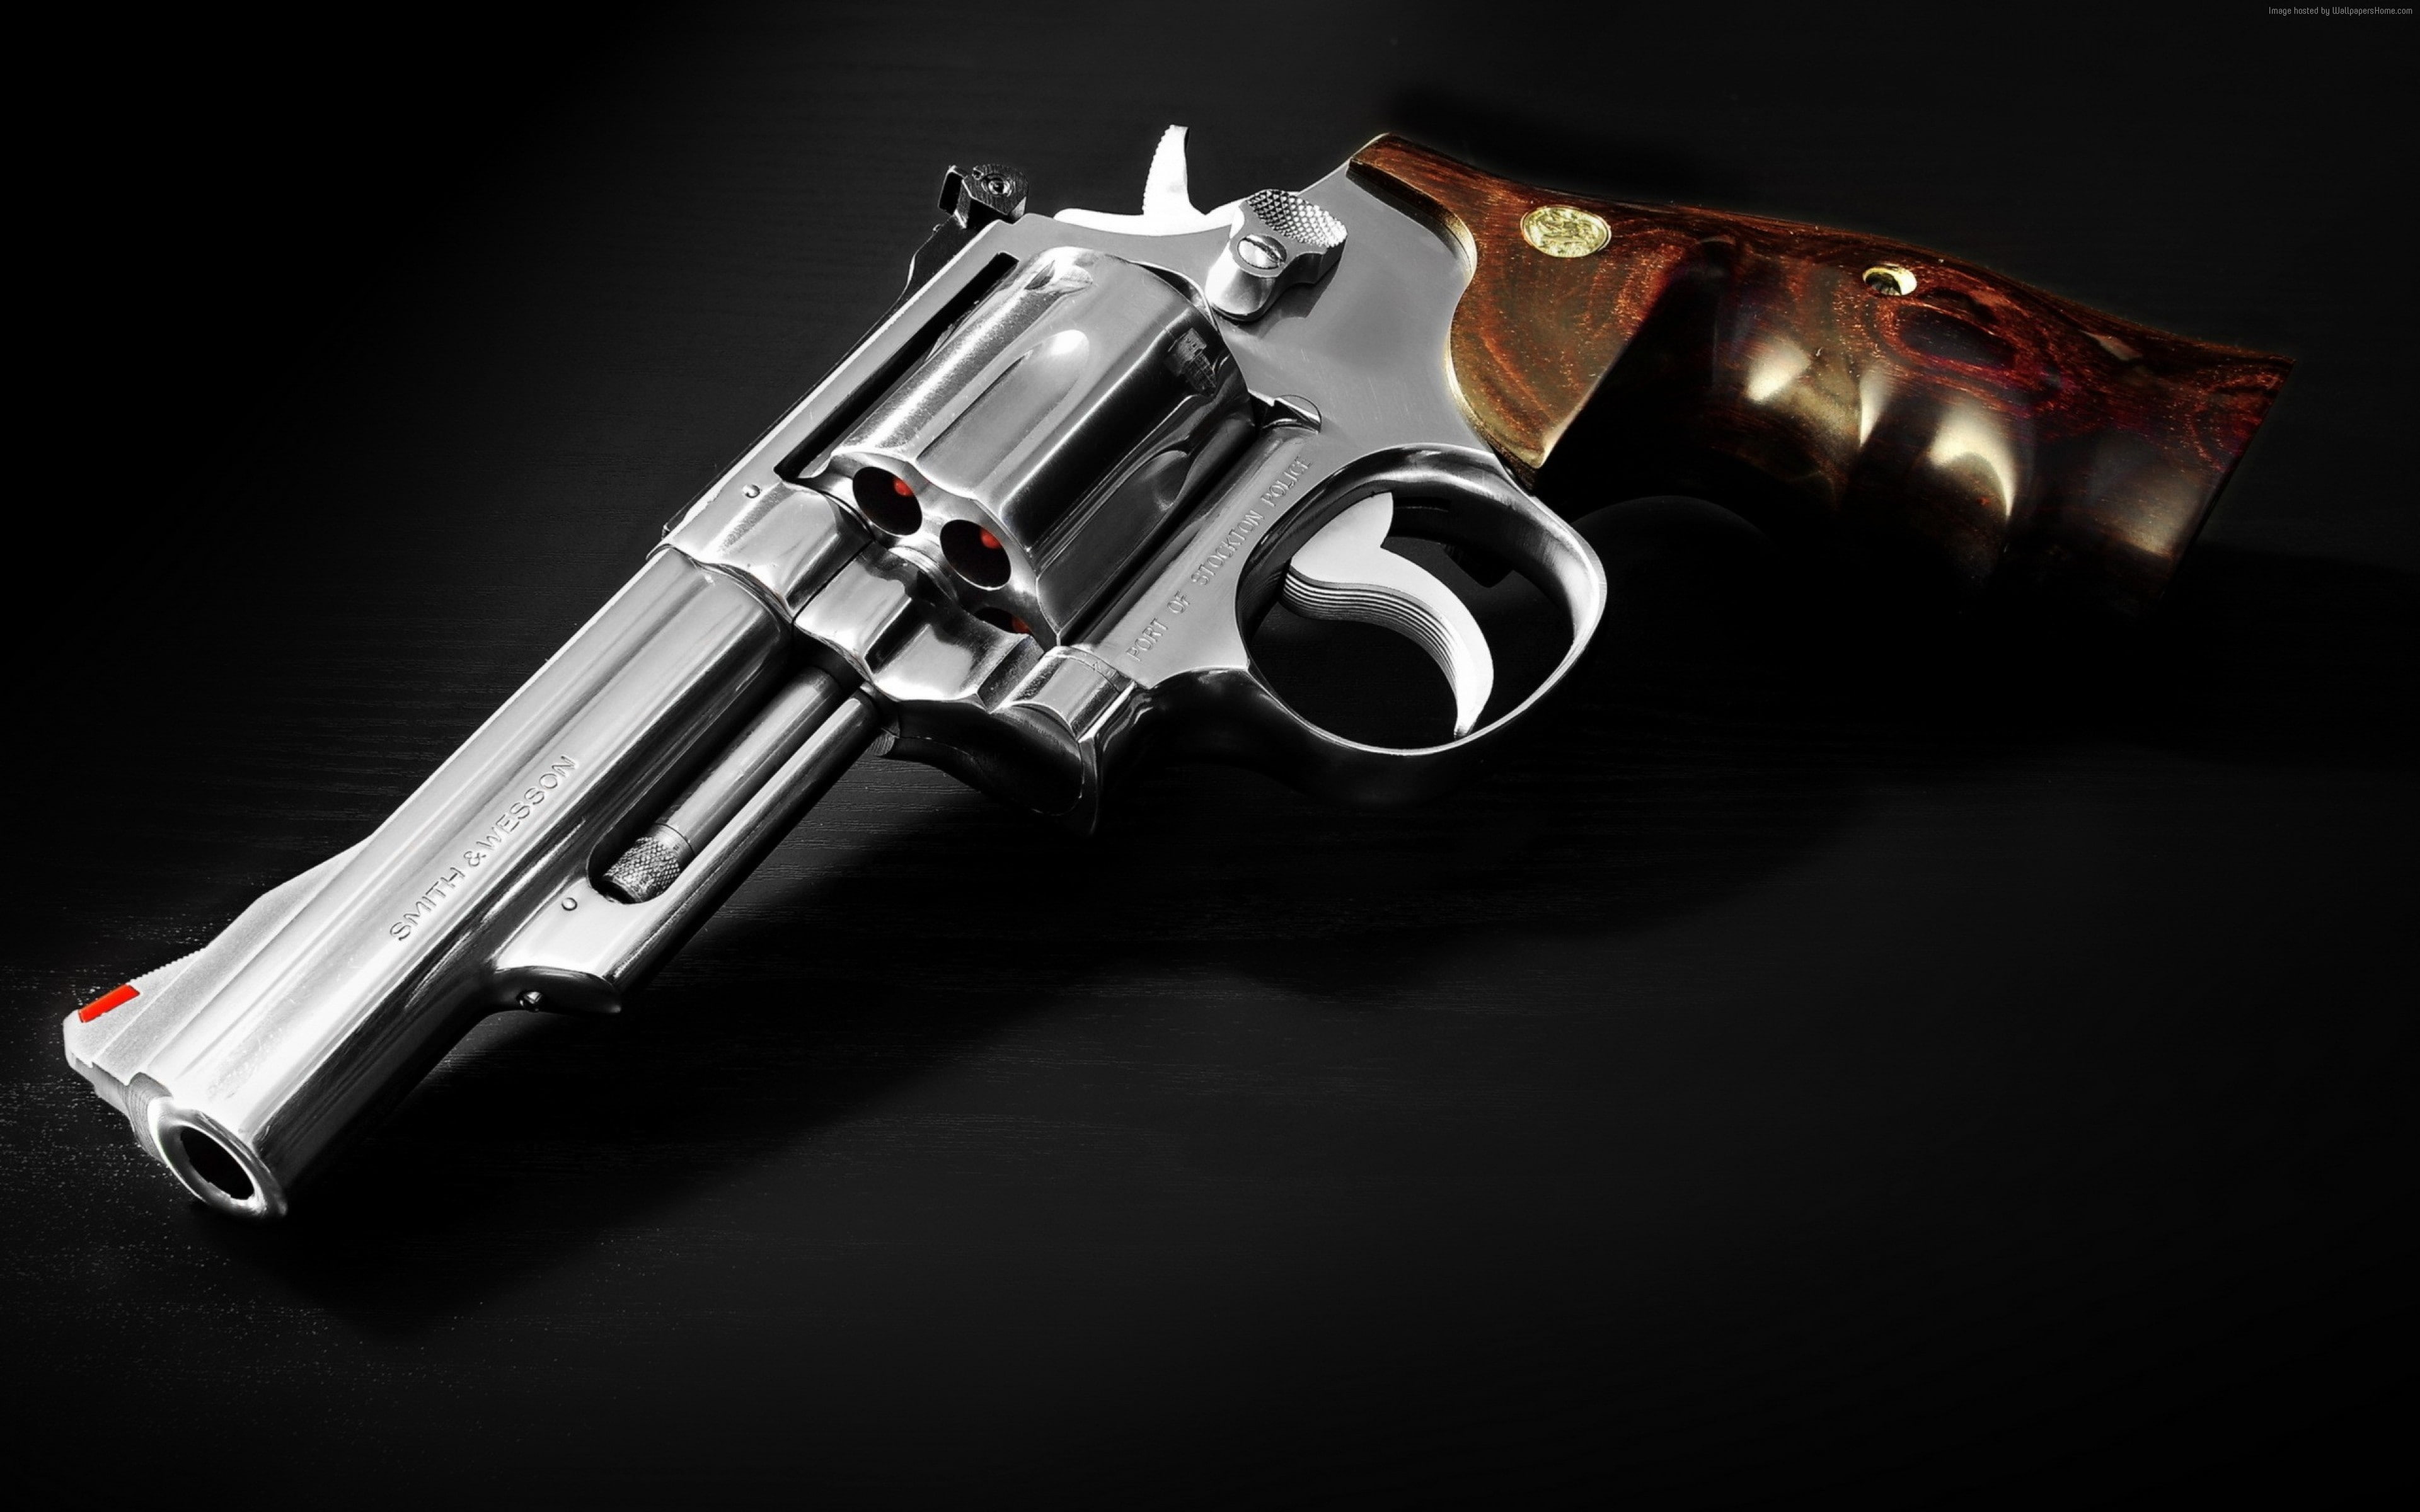 Free Download Hd Wallpaper 44 Magnum Sandw 8 38 Smith And Wesson 629 4 Wallpaper Flare